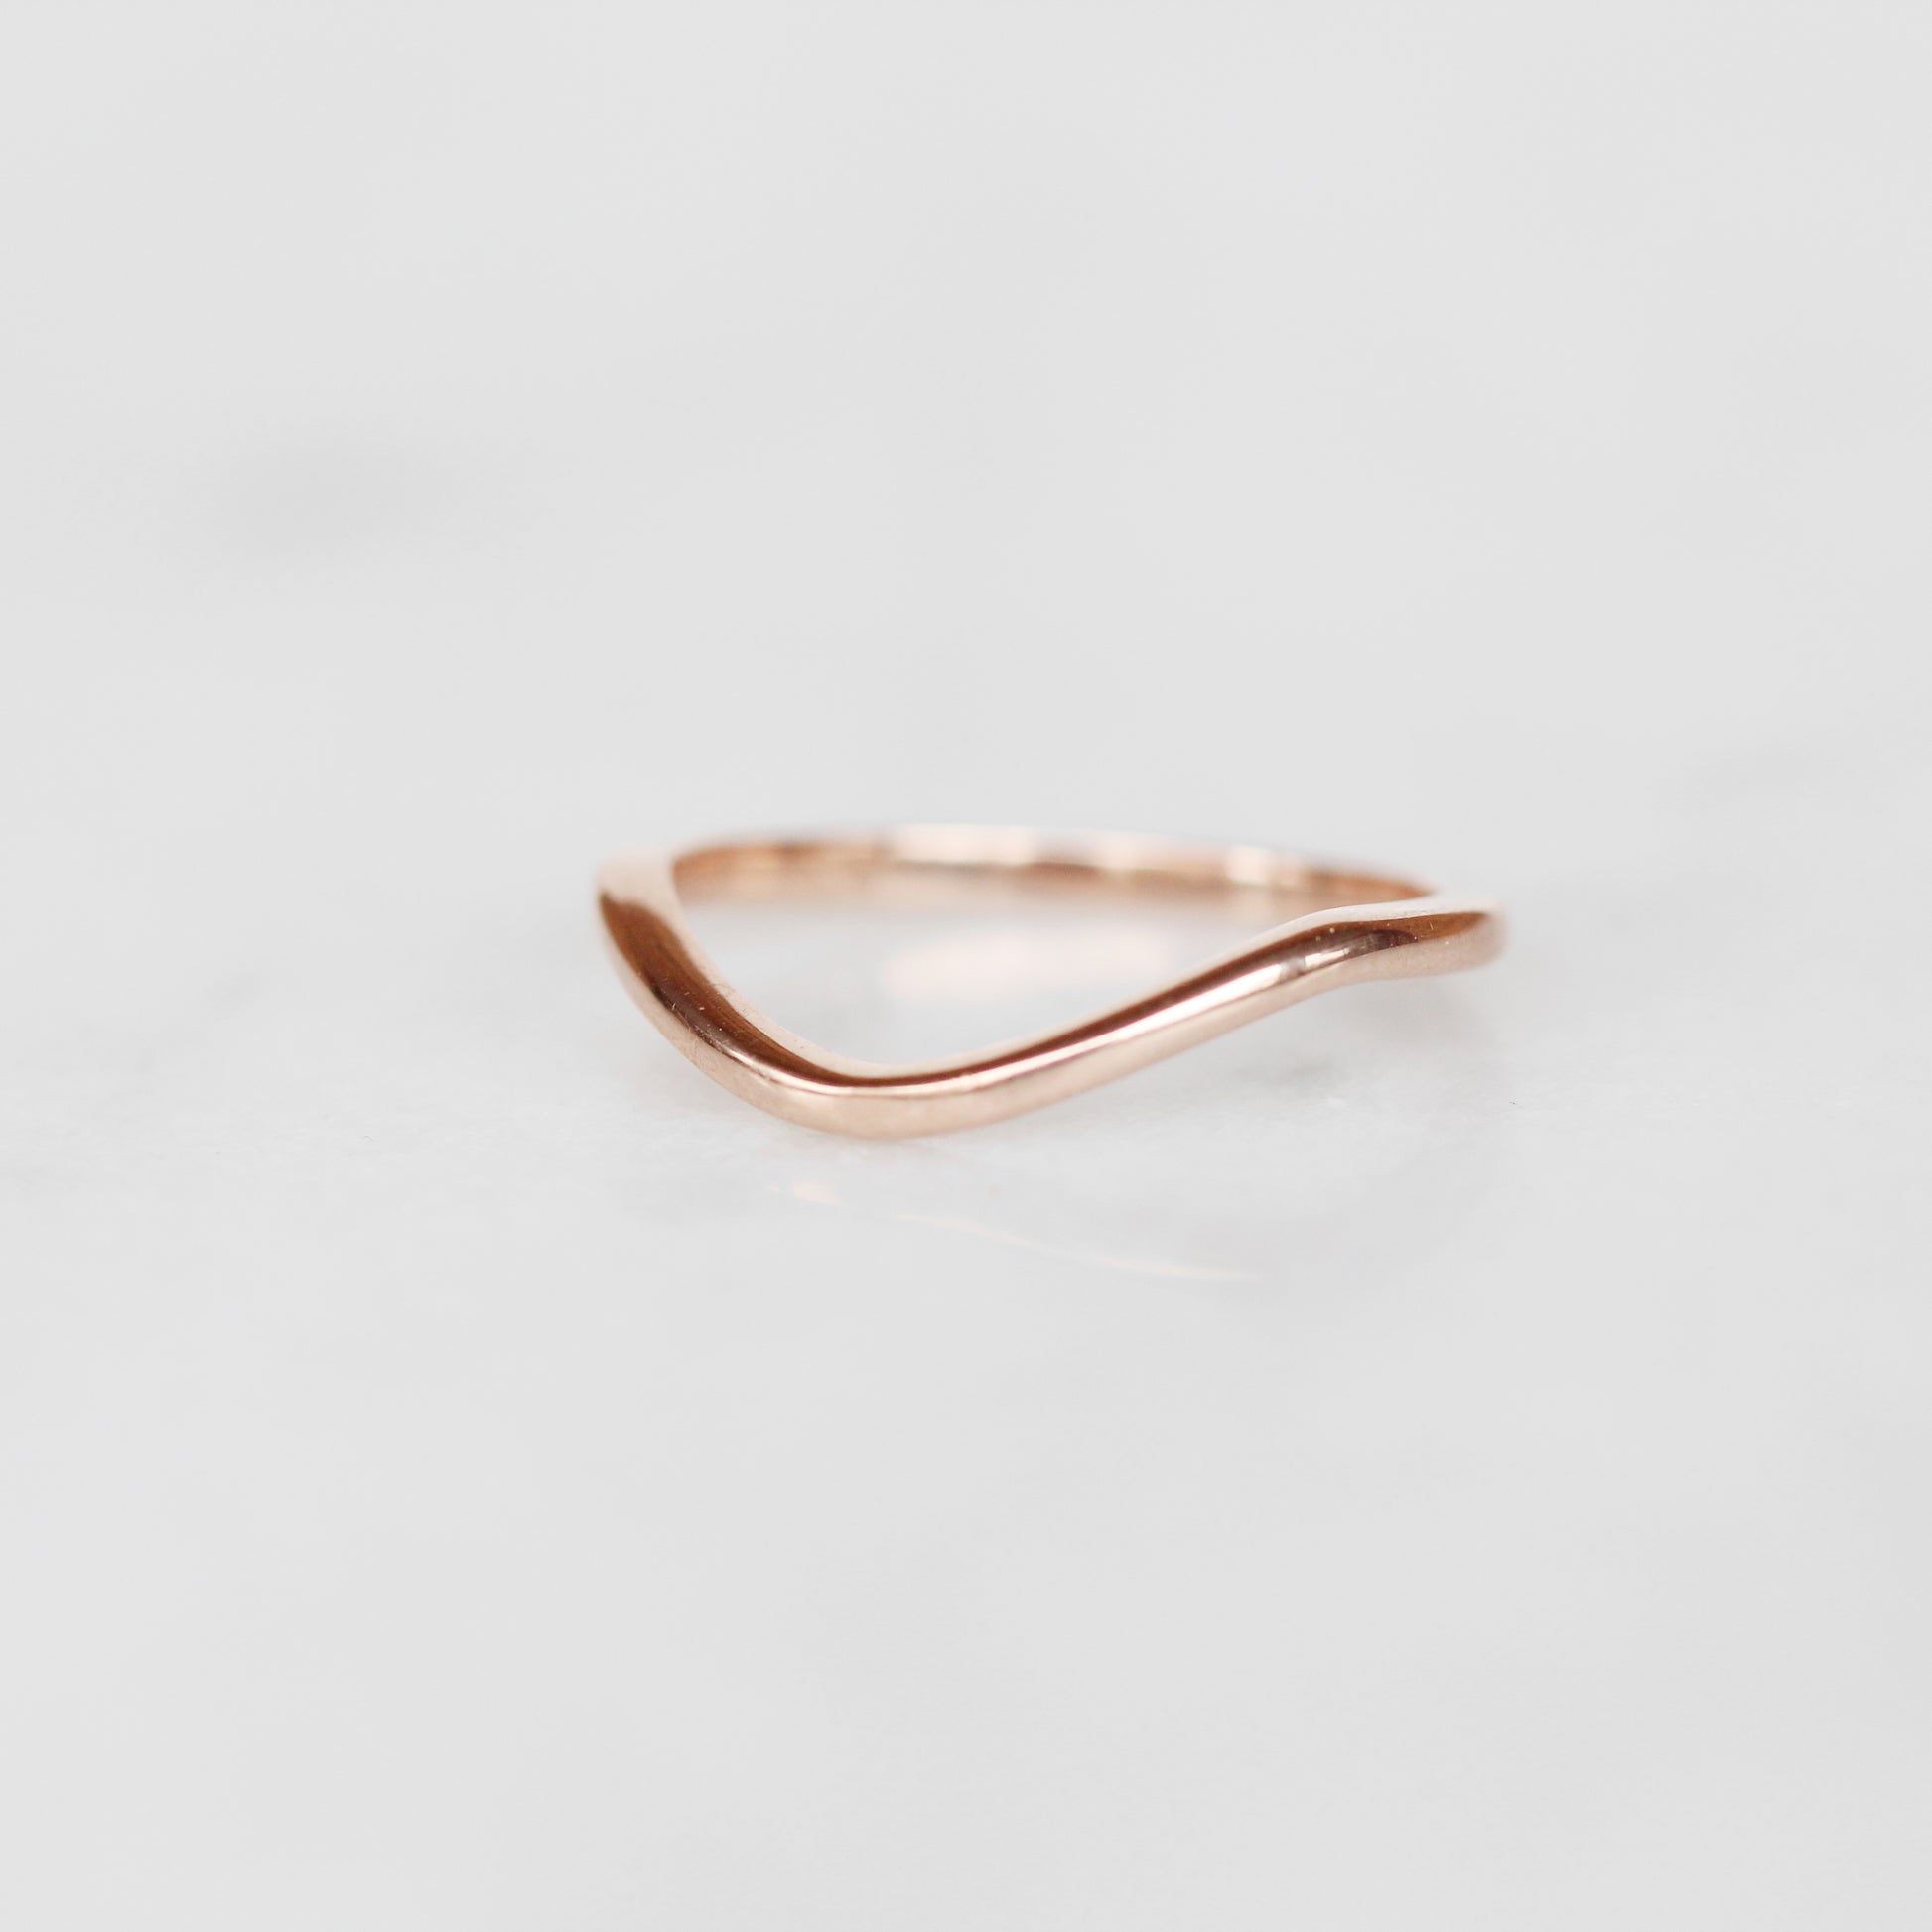 Arden wedding band - customized contour band - 14k gold of choice - Midwinter Co. Alternative Bridal Rings and Modern Fine Jewelry